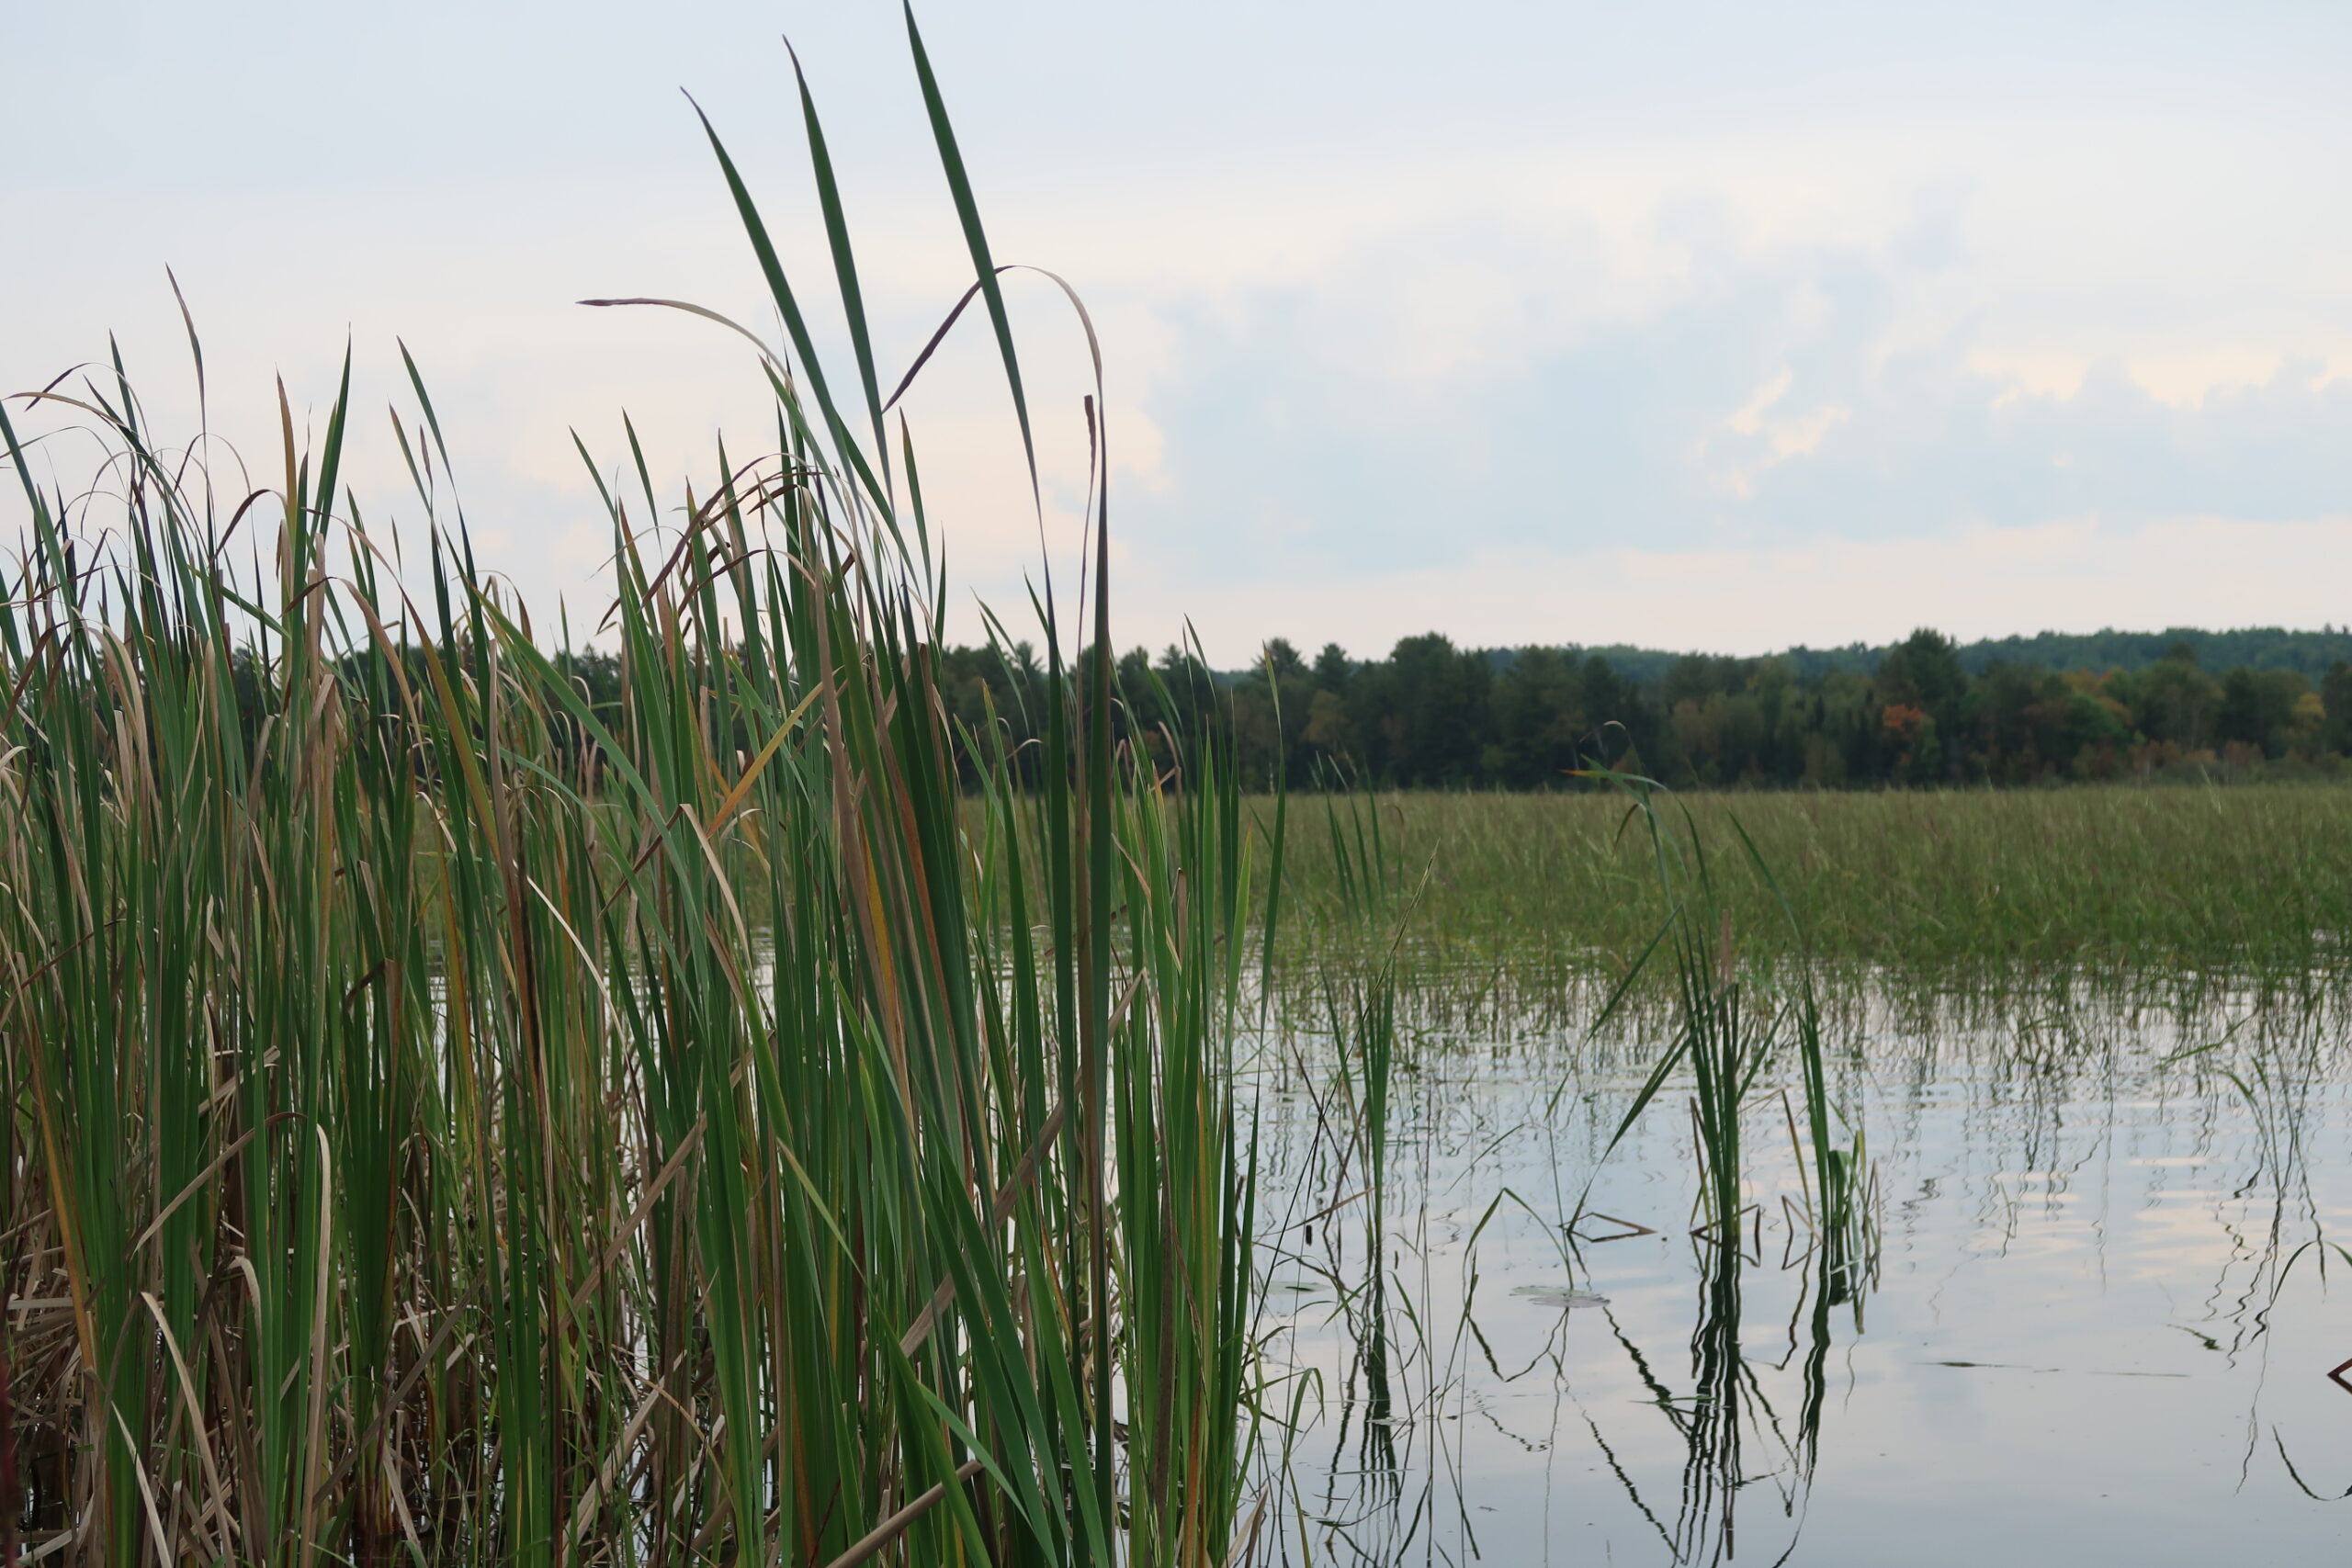 Spotlighting Wisconsin’s last ‘wild lakes’ could increase efforts to preserve them, author hopes